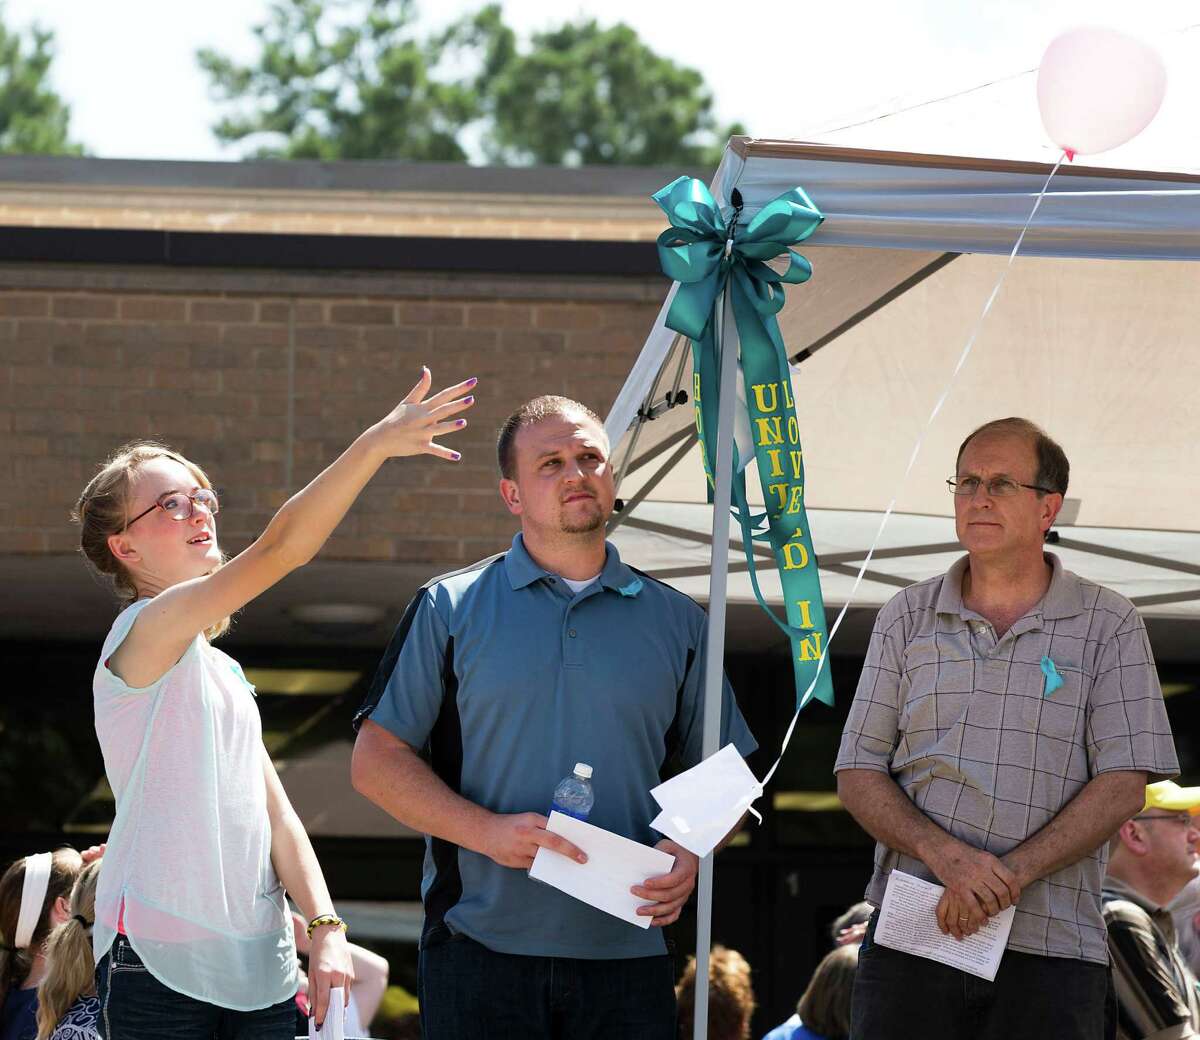 Cassidy Stay, lone survivor of the mass shooting of her parents and siblings, lets a balloon go during a community memorial celebrating the lives of the Stay family at Lemm Elementary School Saturday, July 12, 2014, in Spring. She is standing next to Drew Lyons, center, and Roger Lyons.